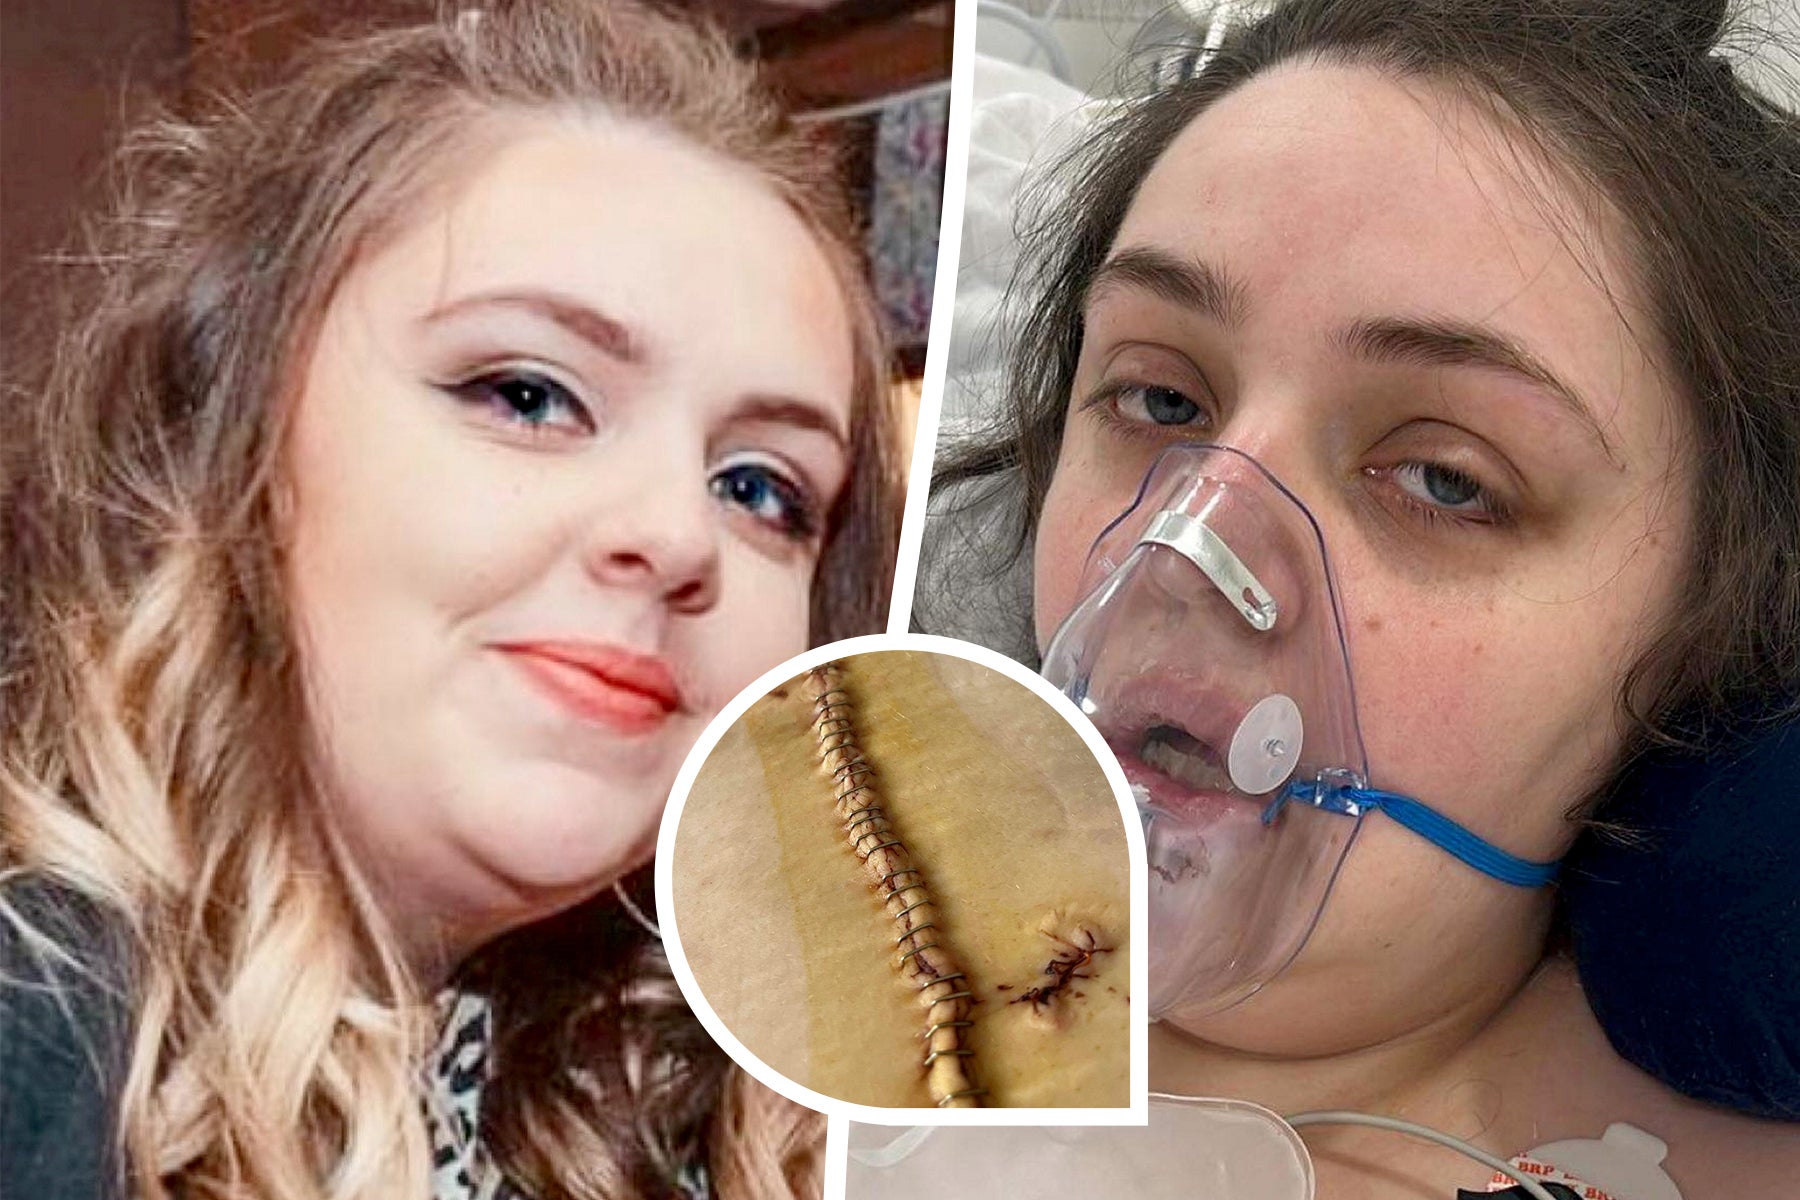 Chloe Quick who was put in a medically induced coma after having surgery for a gastric sleeve in Turkey